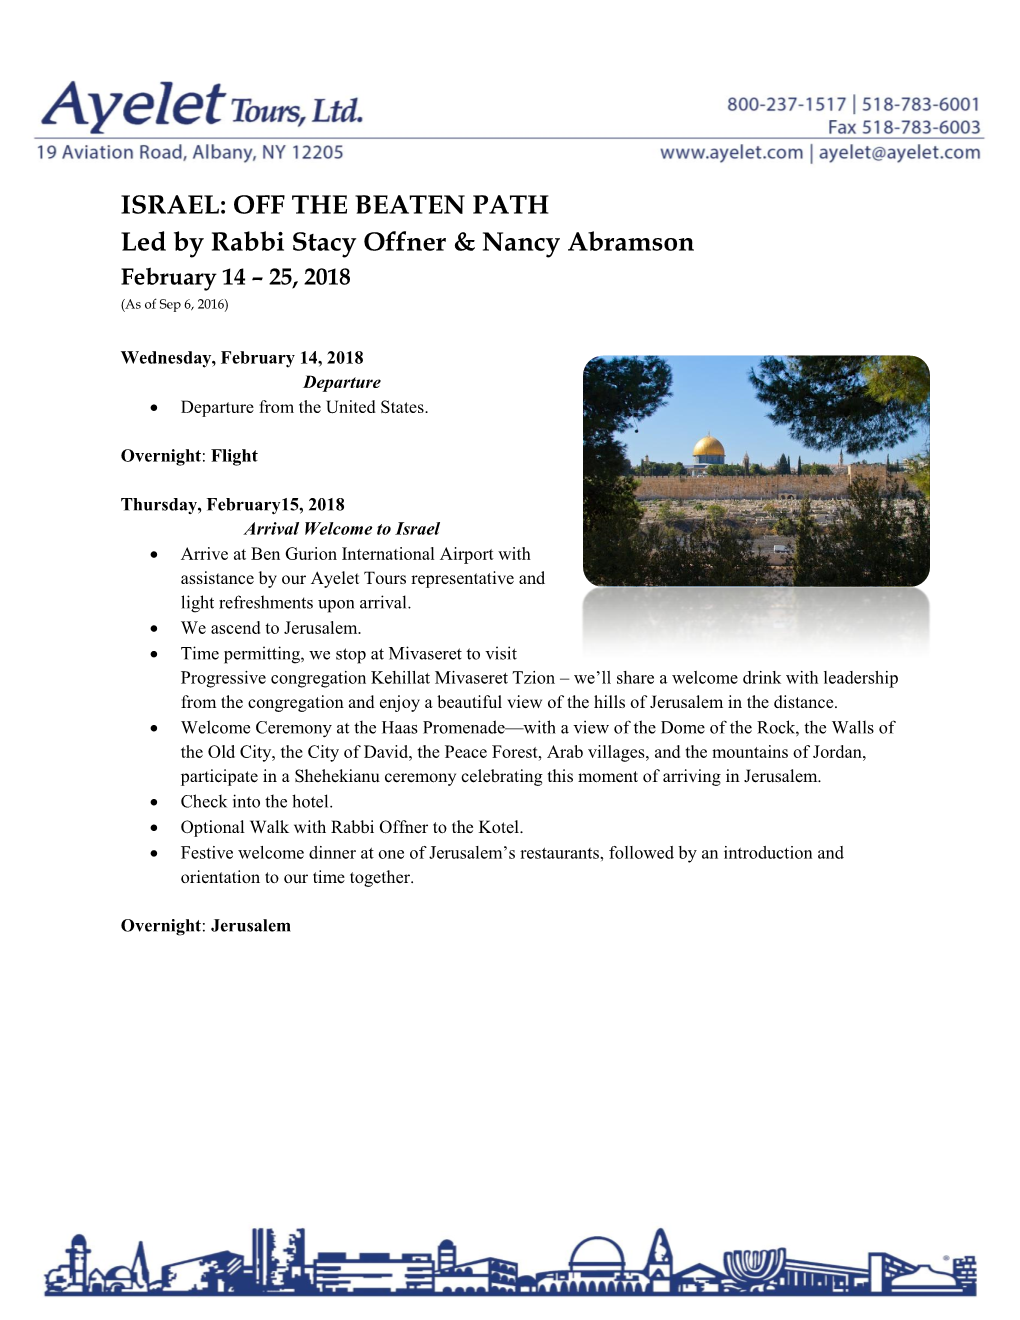 OFF the BEATEN PATH Led by Rabbi Stacy Offner & Nancy Abramson